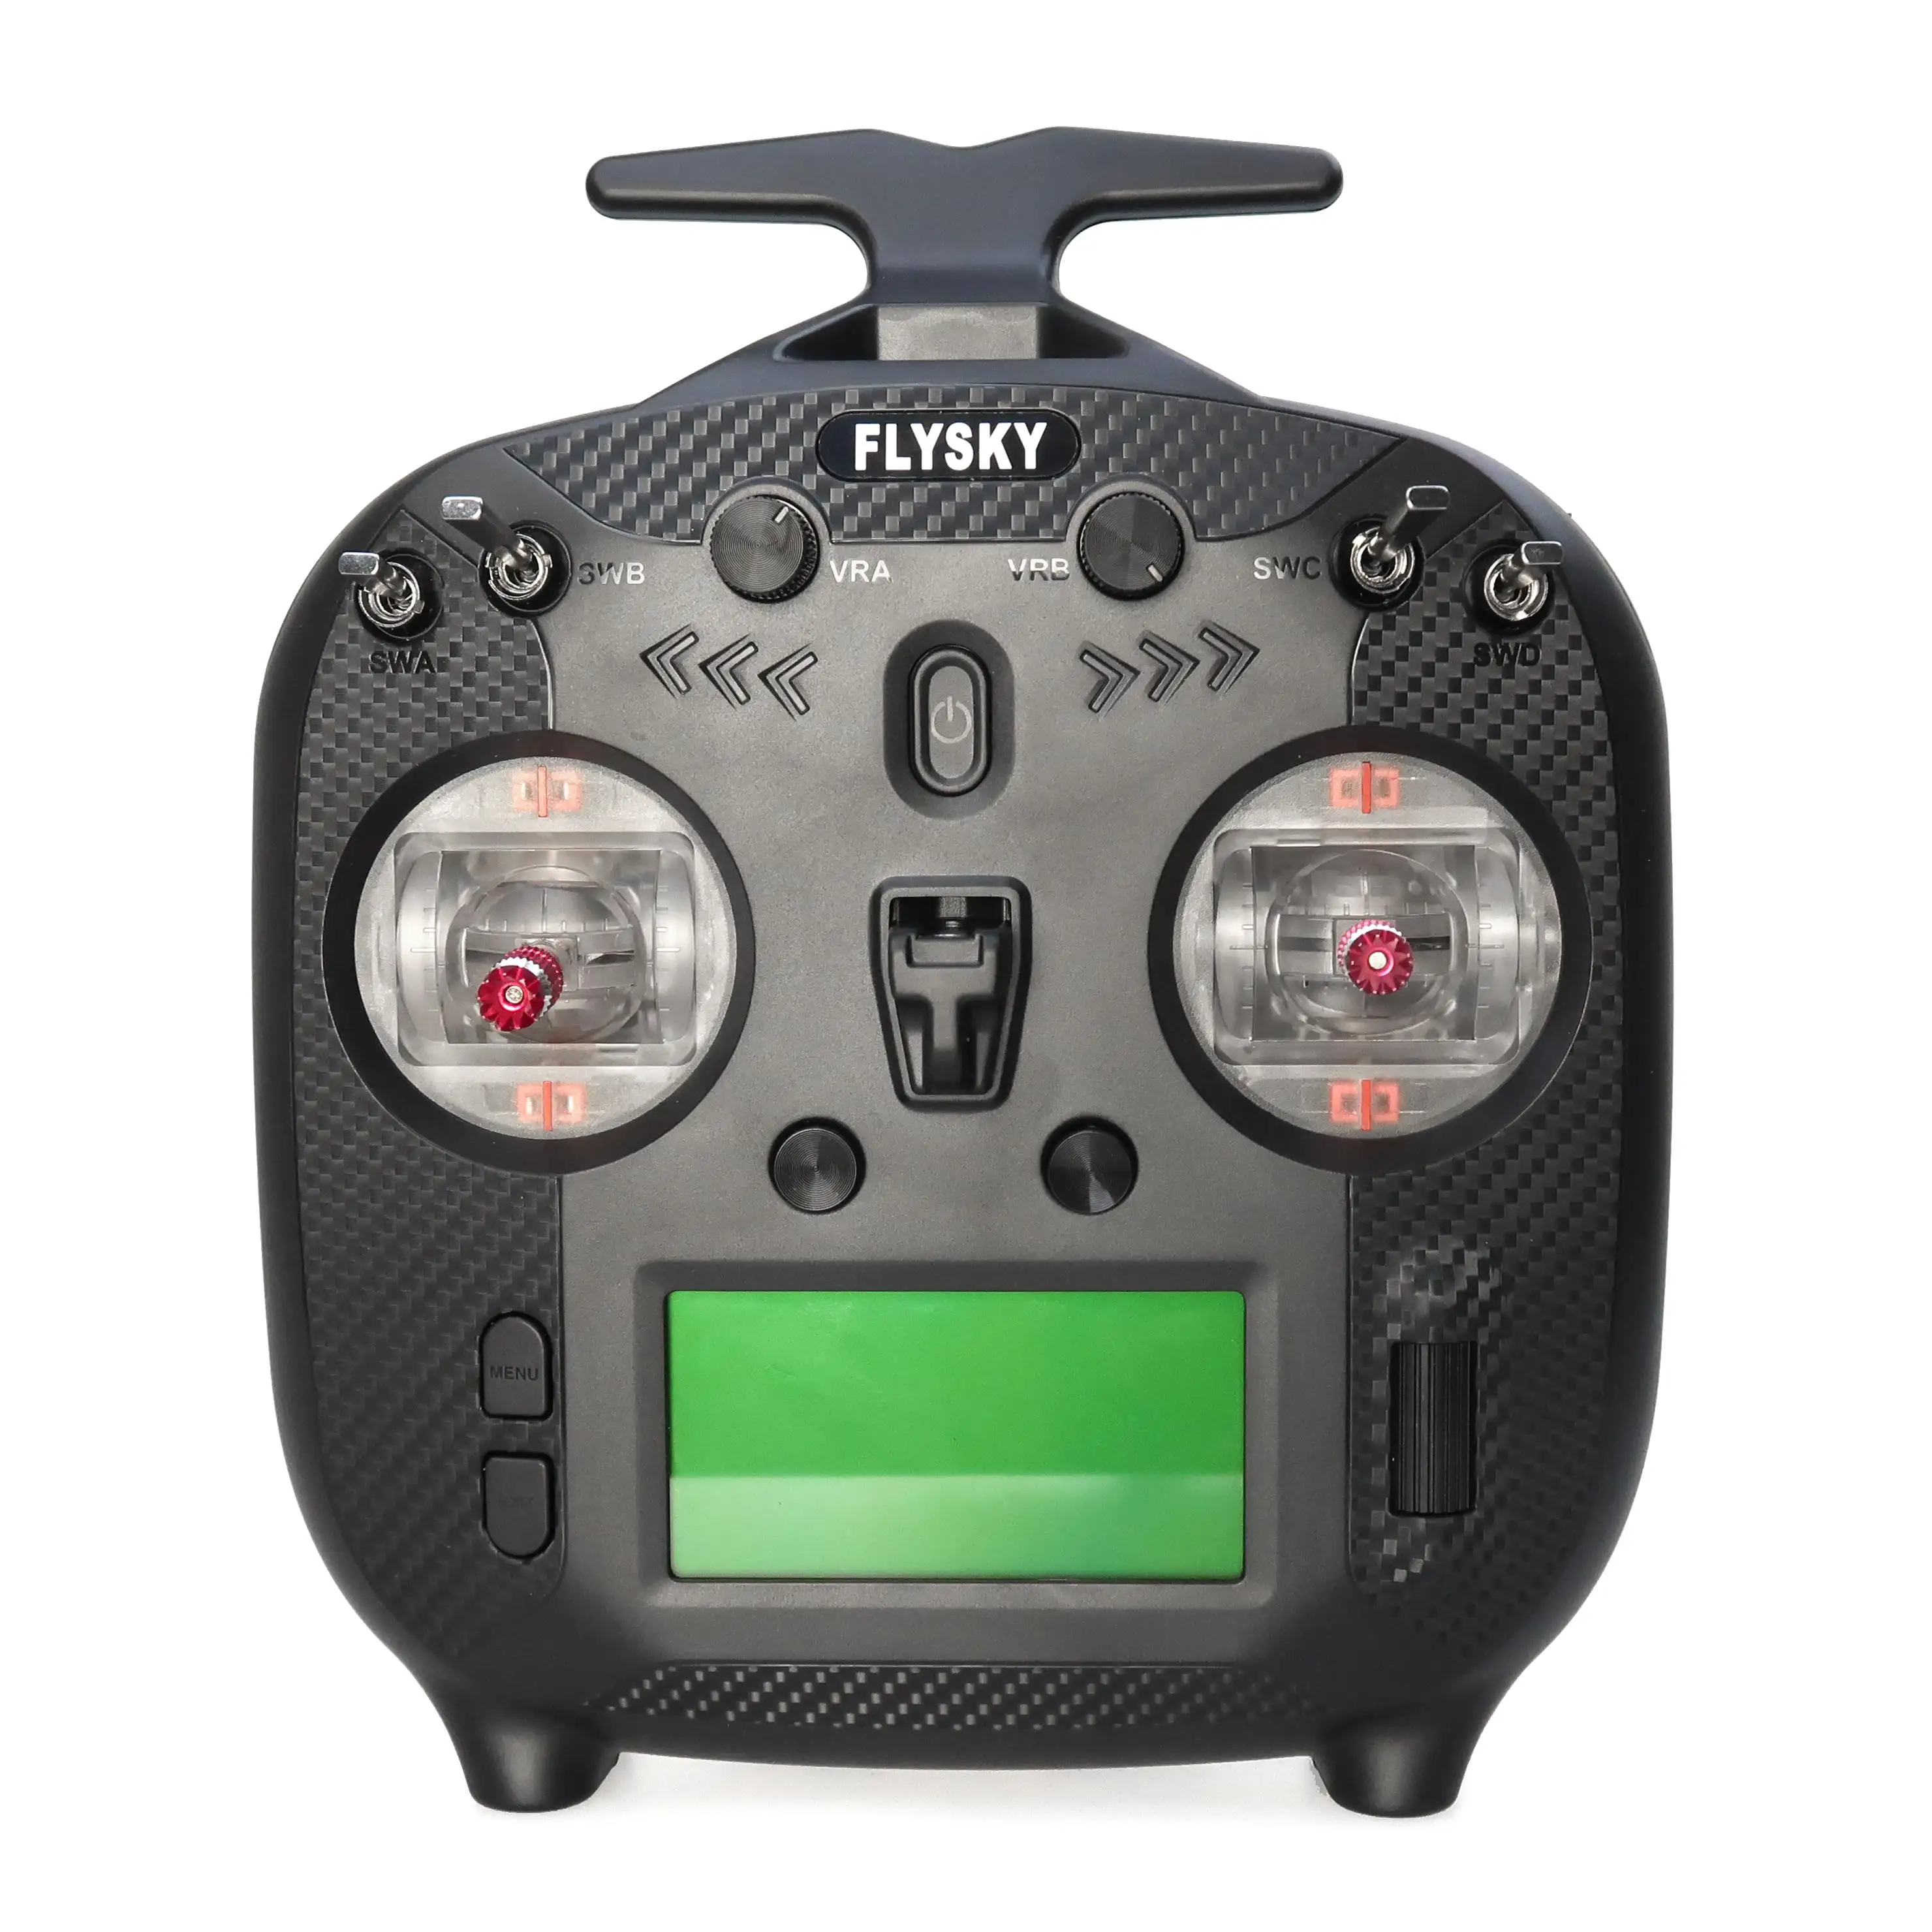 FLYSKY FS-ST8 2.4G 10CH ANT RGB Assistant 3.0 Radio Transmitter with FS-SR8 Receiver for RC Airplane Car Boat Robot FPV Drone